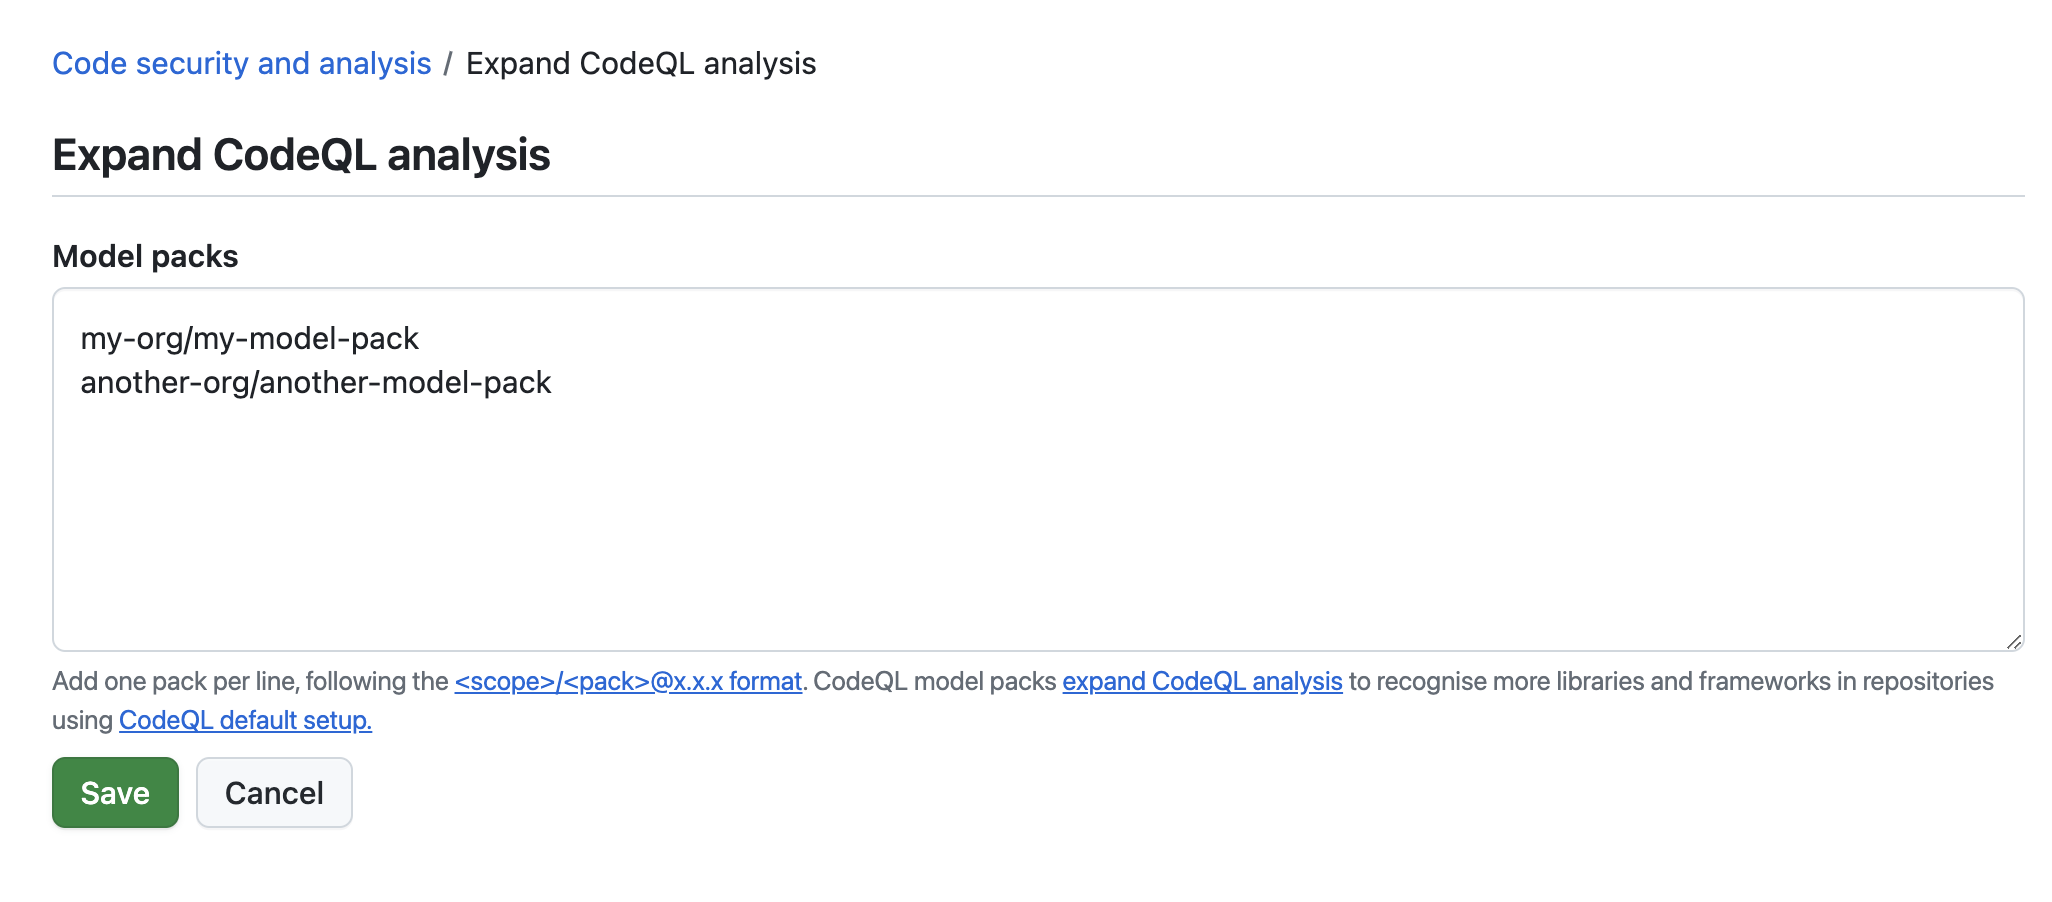 Screenshot of the "Expand CodeQL analysis" view" in the settings for an organization.